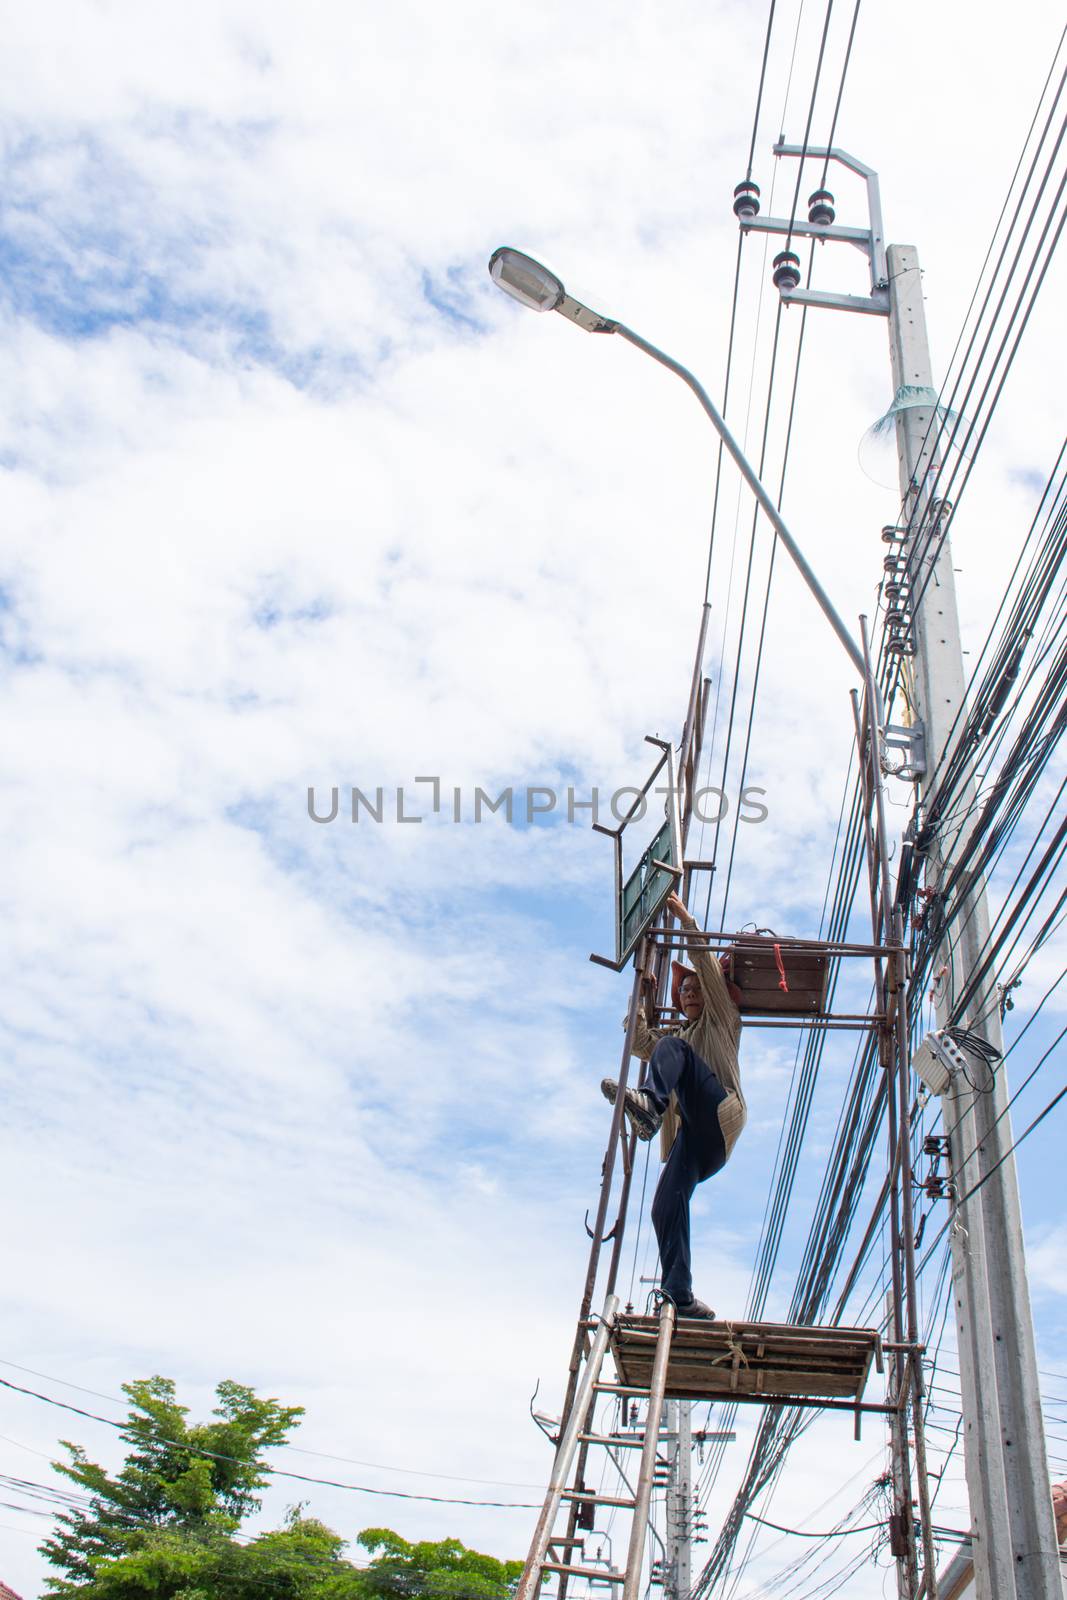 Bangkok, Thailand - June 26, 2016 : Unidentified electricians or handyman or worker risk working to install electric line on high pole by scaffolding on pickup truck at Bangkok Thailand.